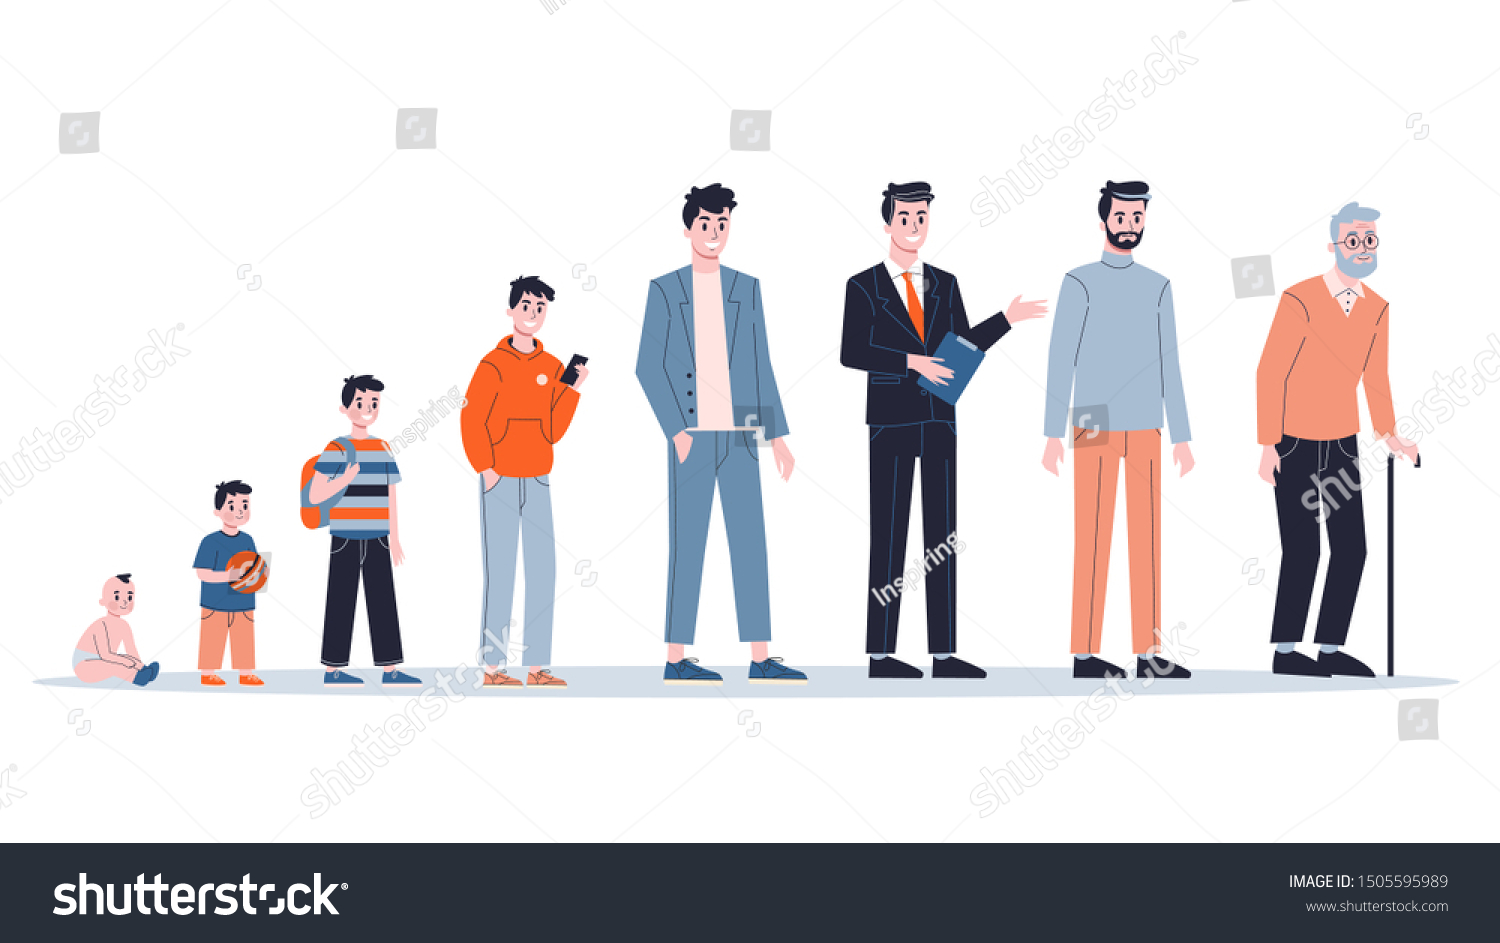 SVG of Man in different age. From child to old person. Teenager, adult and baby generation. Aging process. Isolated vector illustration in cartoon style svg